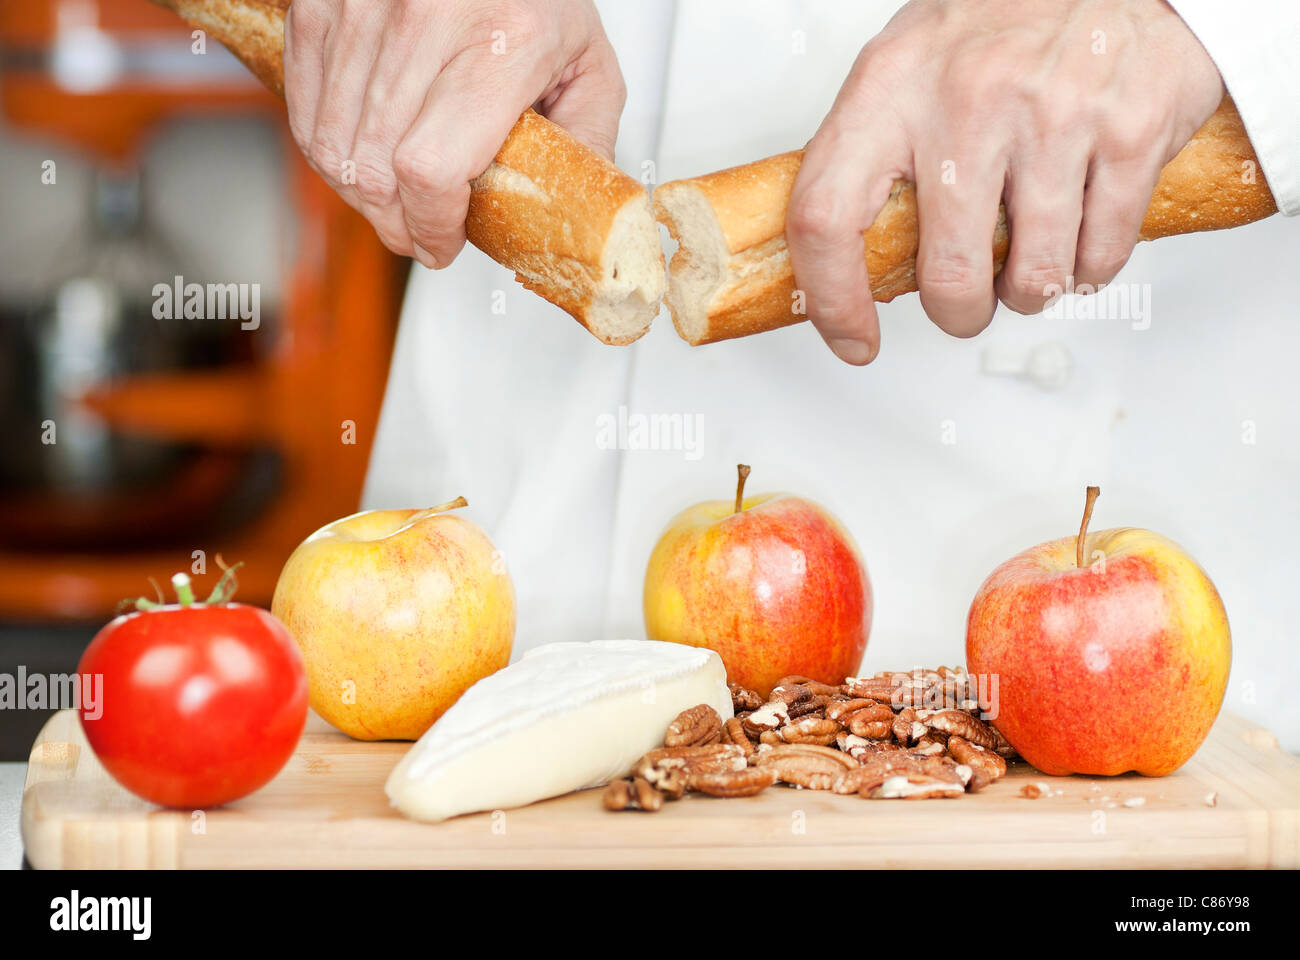 Close-up of a chef breaking a baguette over a cutting board of apples, pecans, a tomato and brie. Stock Photo